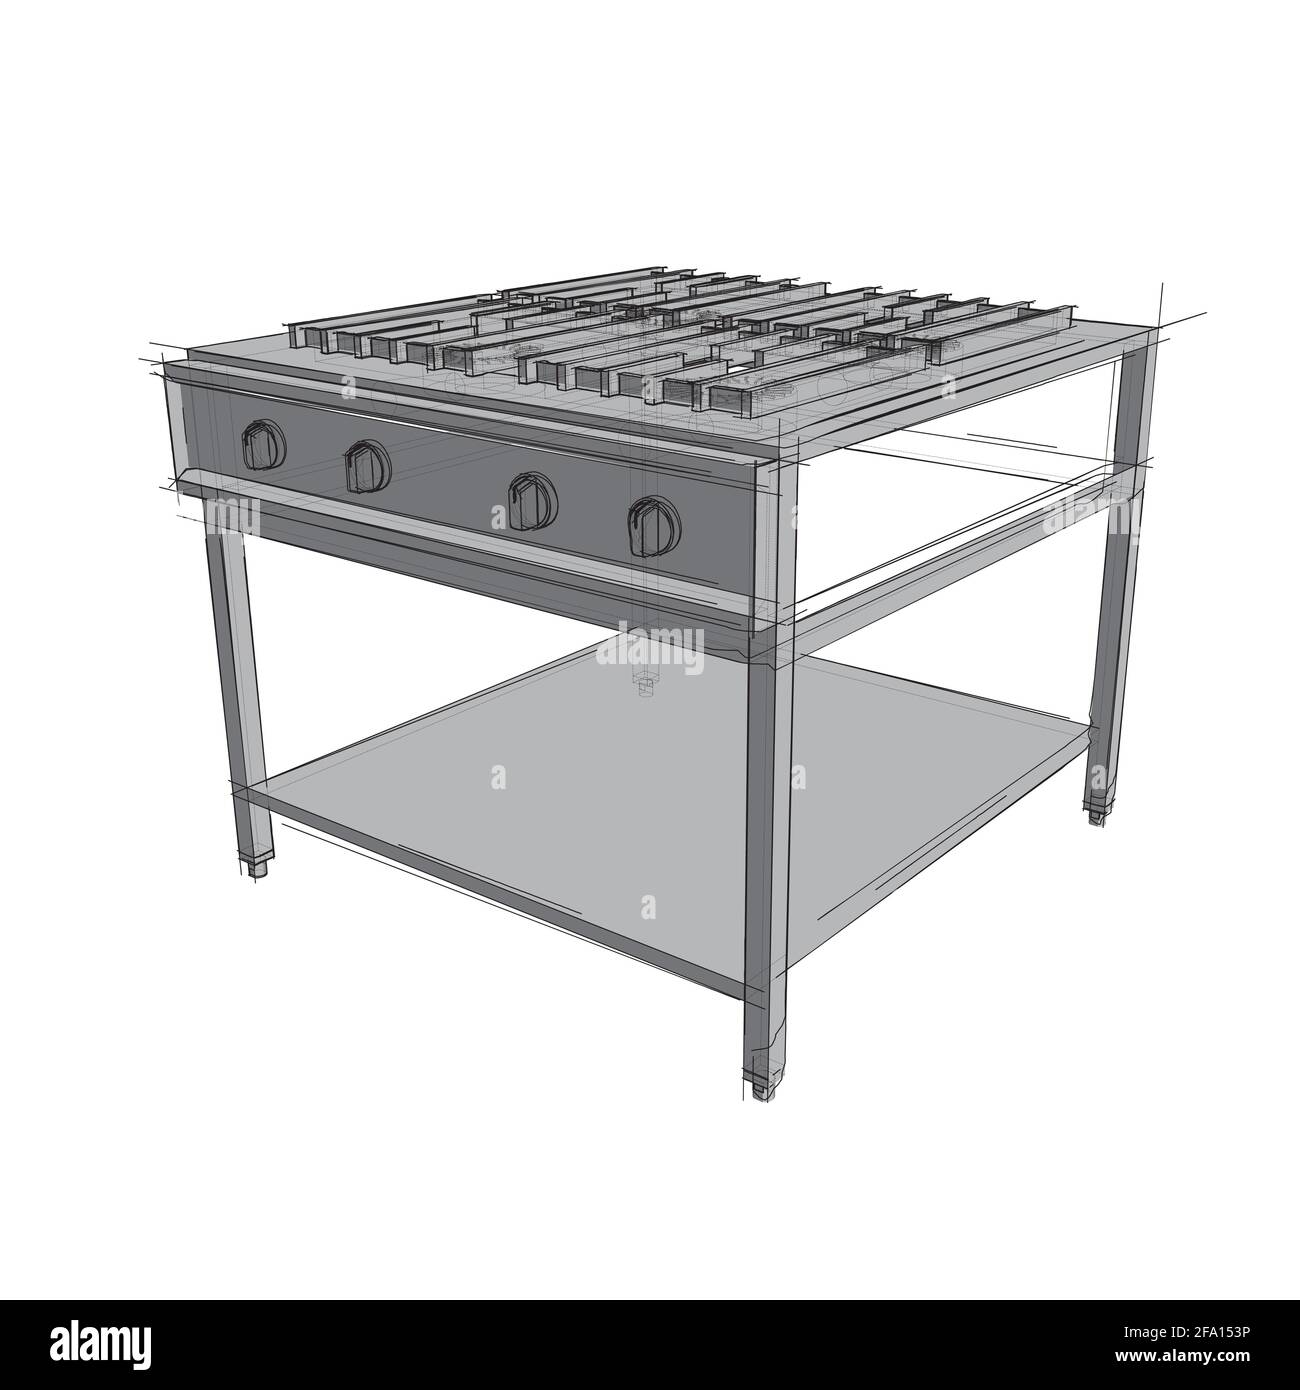 Technical drawing of a restaurant cooker in an architectural style. Schematic vector illustration of commercial kitchen roaster on white background Stock Vector